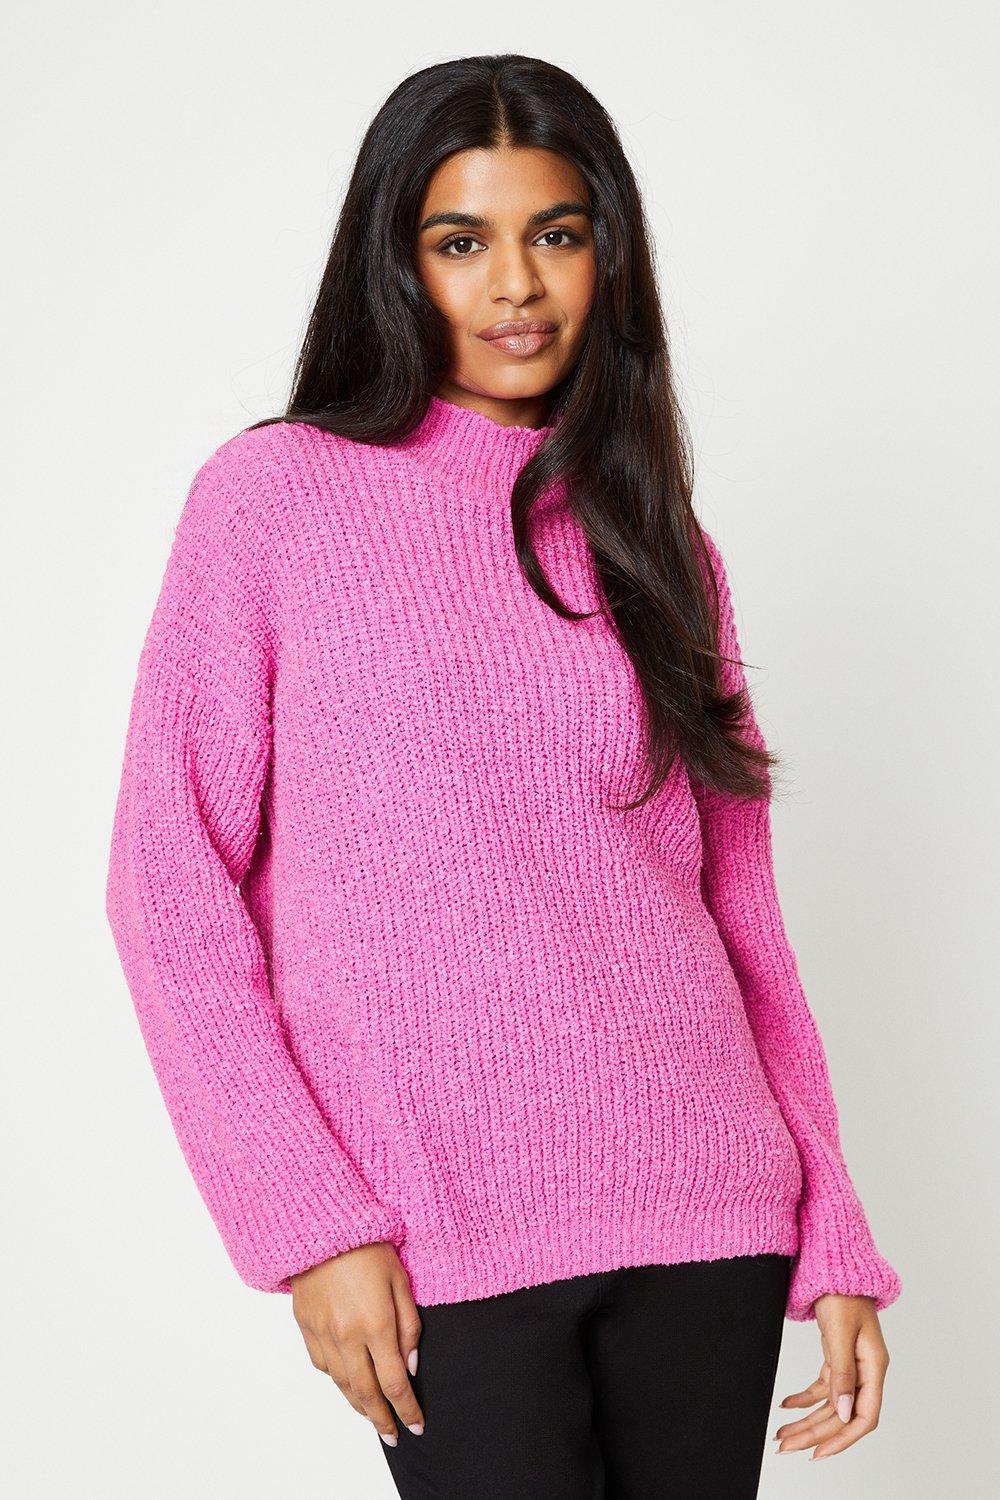 Women’s Petite Boucle Slouchy High Neck Jumper - pink - M